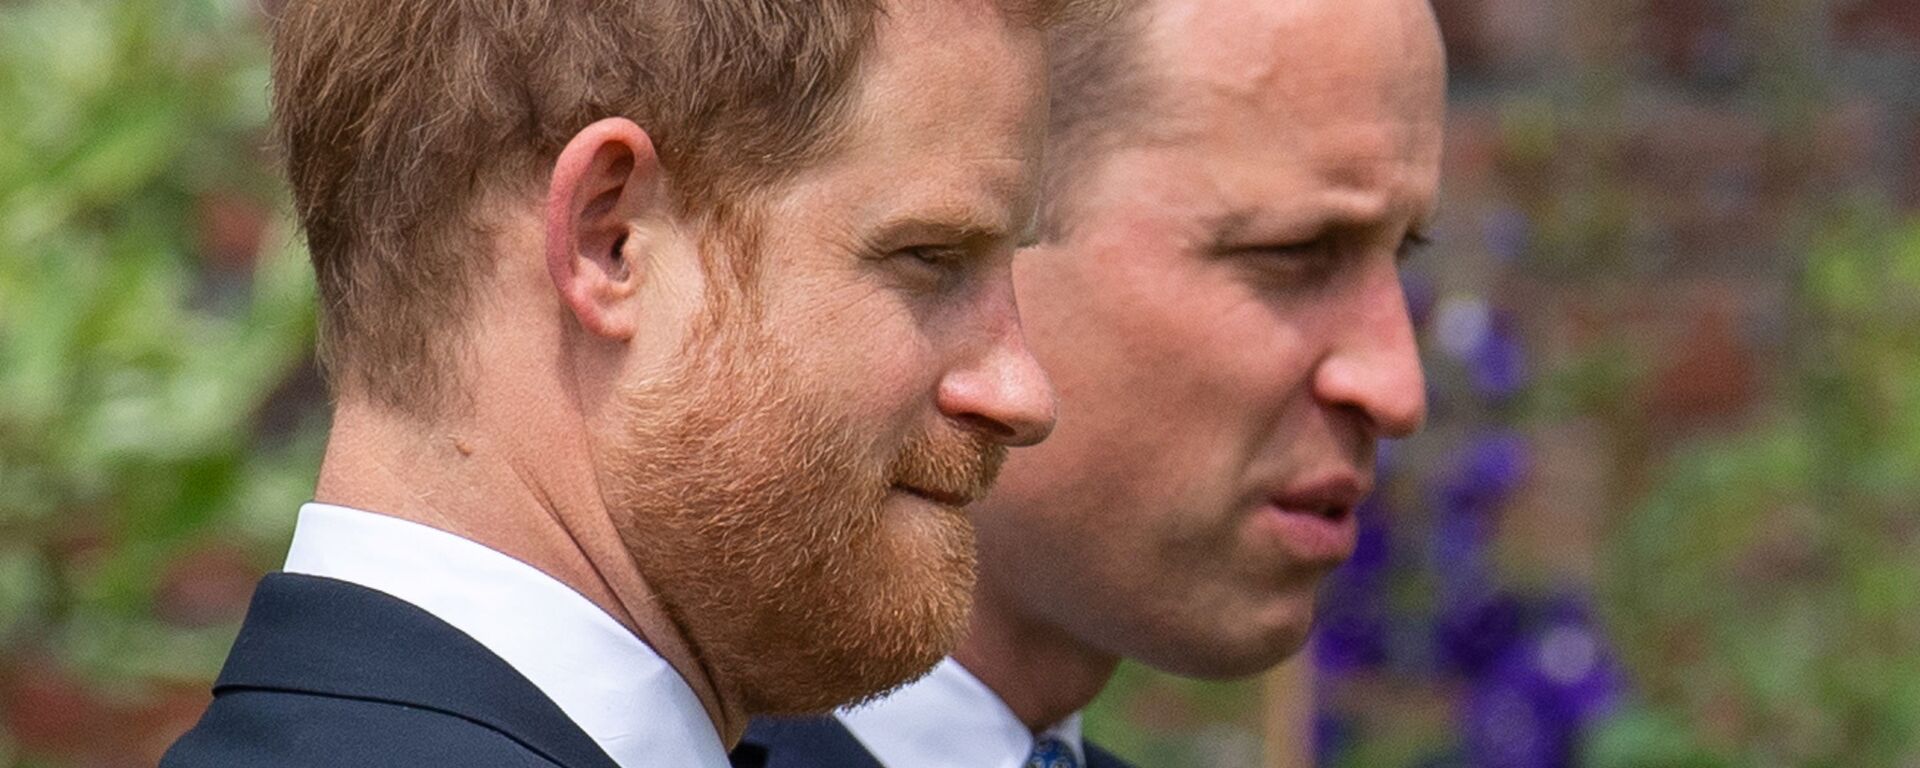 Britain's Prince William, The Duke of Cambridge, and Prince Harry, Duke of Sussex, attend the unveiling of a statue they commissioned of their mother Diana, Princess of Wales, in the Sunken Garden at Kensington Palace, London, Britain July 1, 2021 - Sputnik International, 1920, 04.07.2021